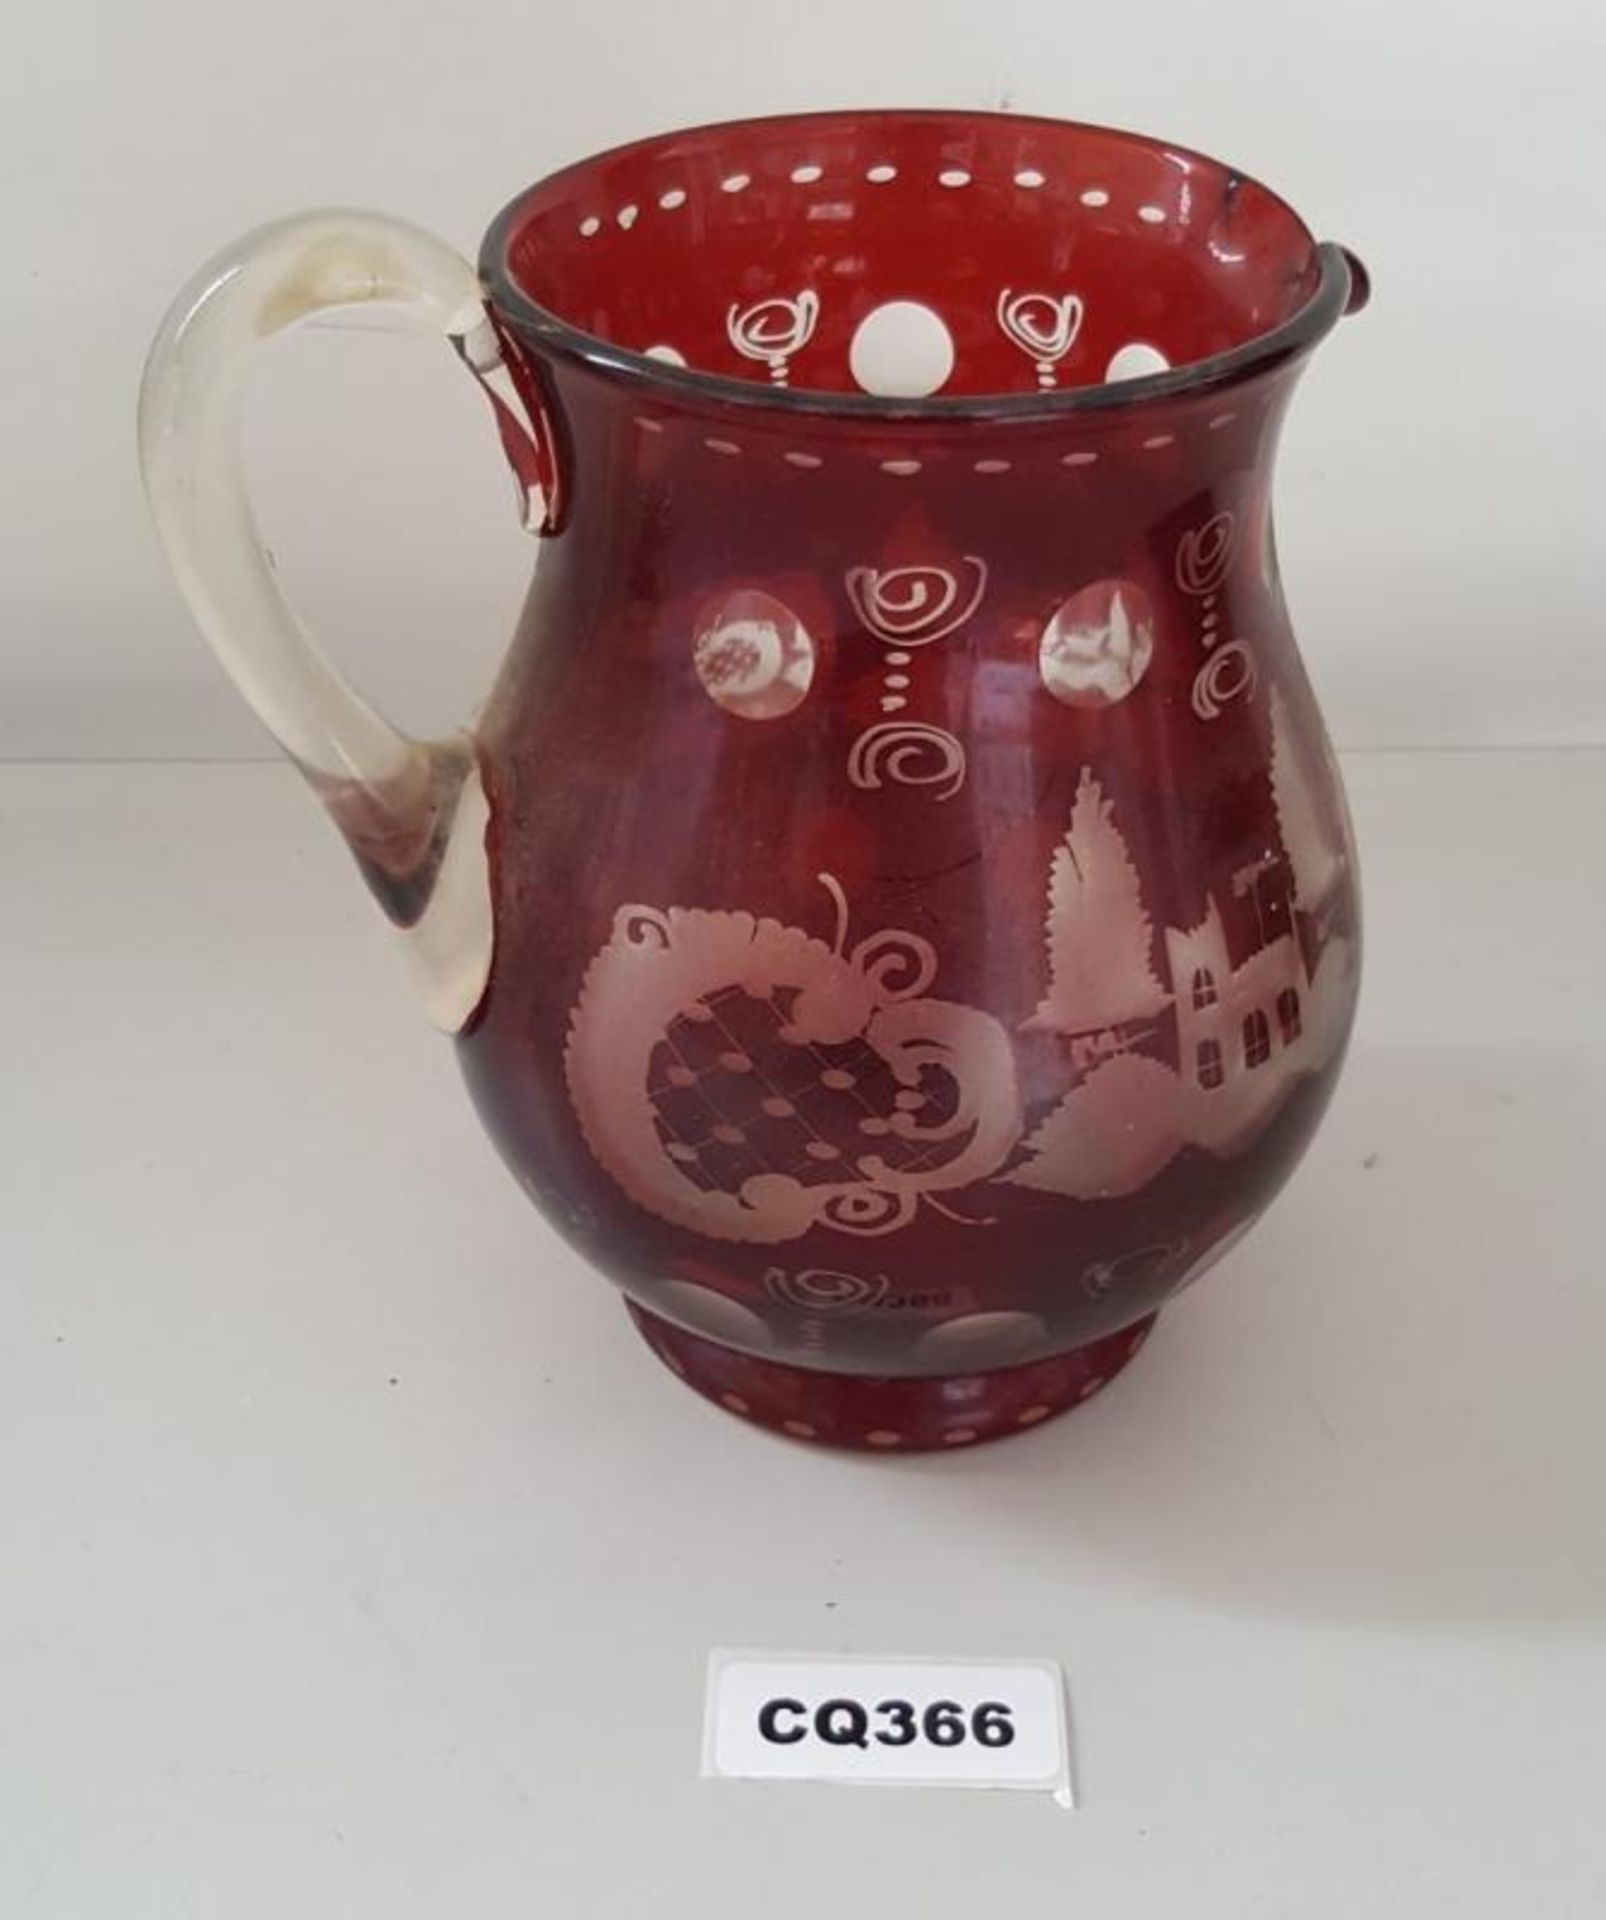 1 x Egermann Antique Glass Pitcher In Ruby Red With Clear Handle - Ref CQ366 E - Dimensions: H19/L17